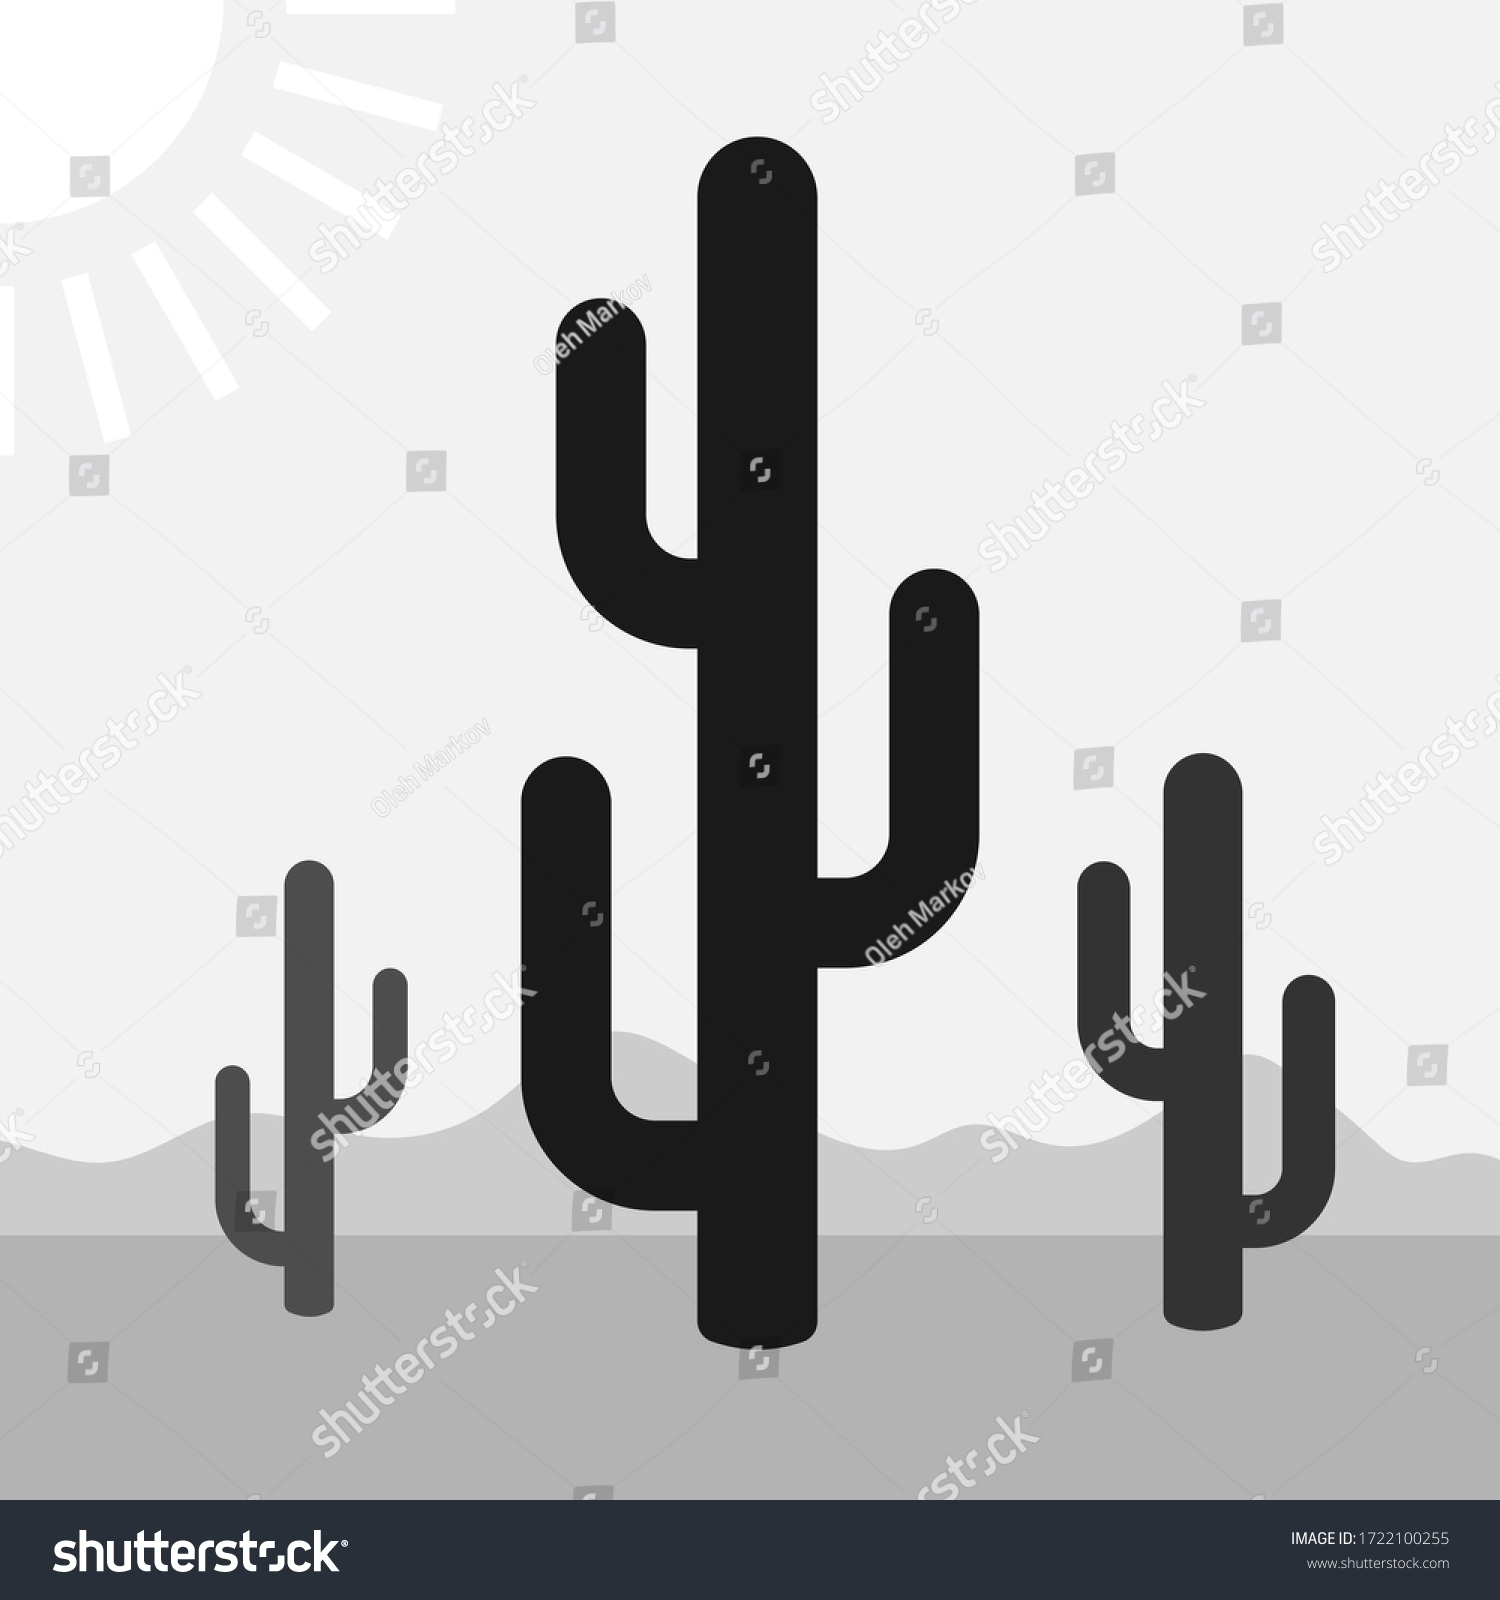 SVG of Monochrome scene of cactuses flat vector icon. svg